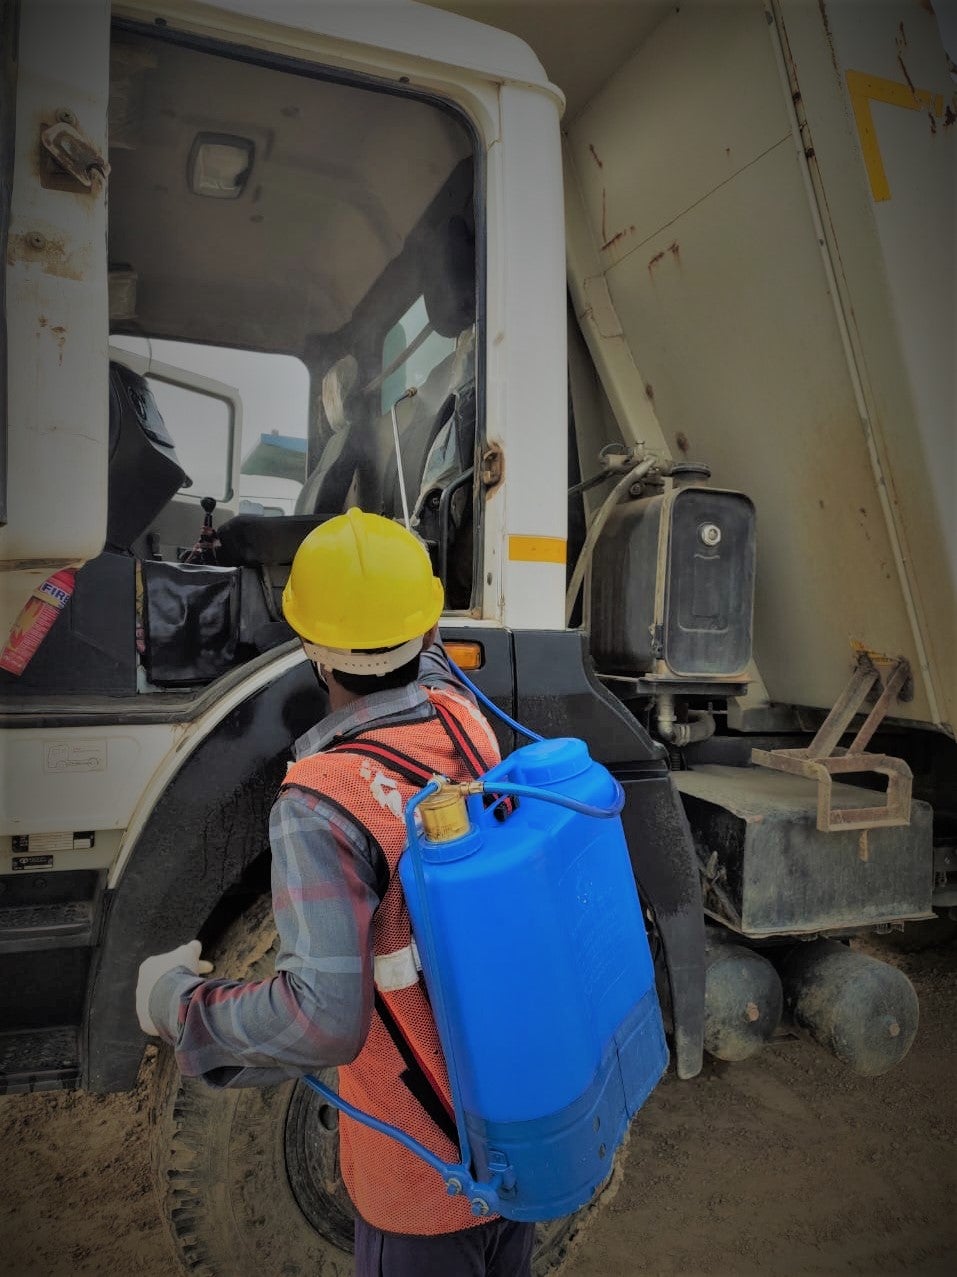 Vehicle being sanitized at the EDFC project site, India